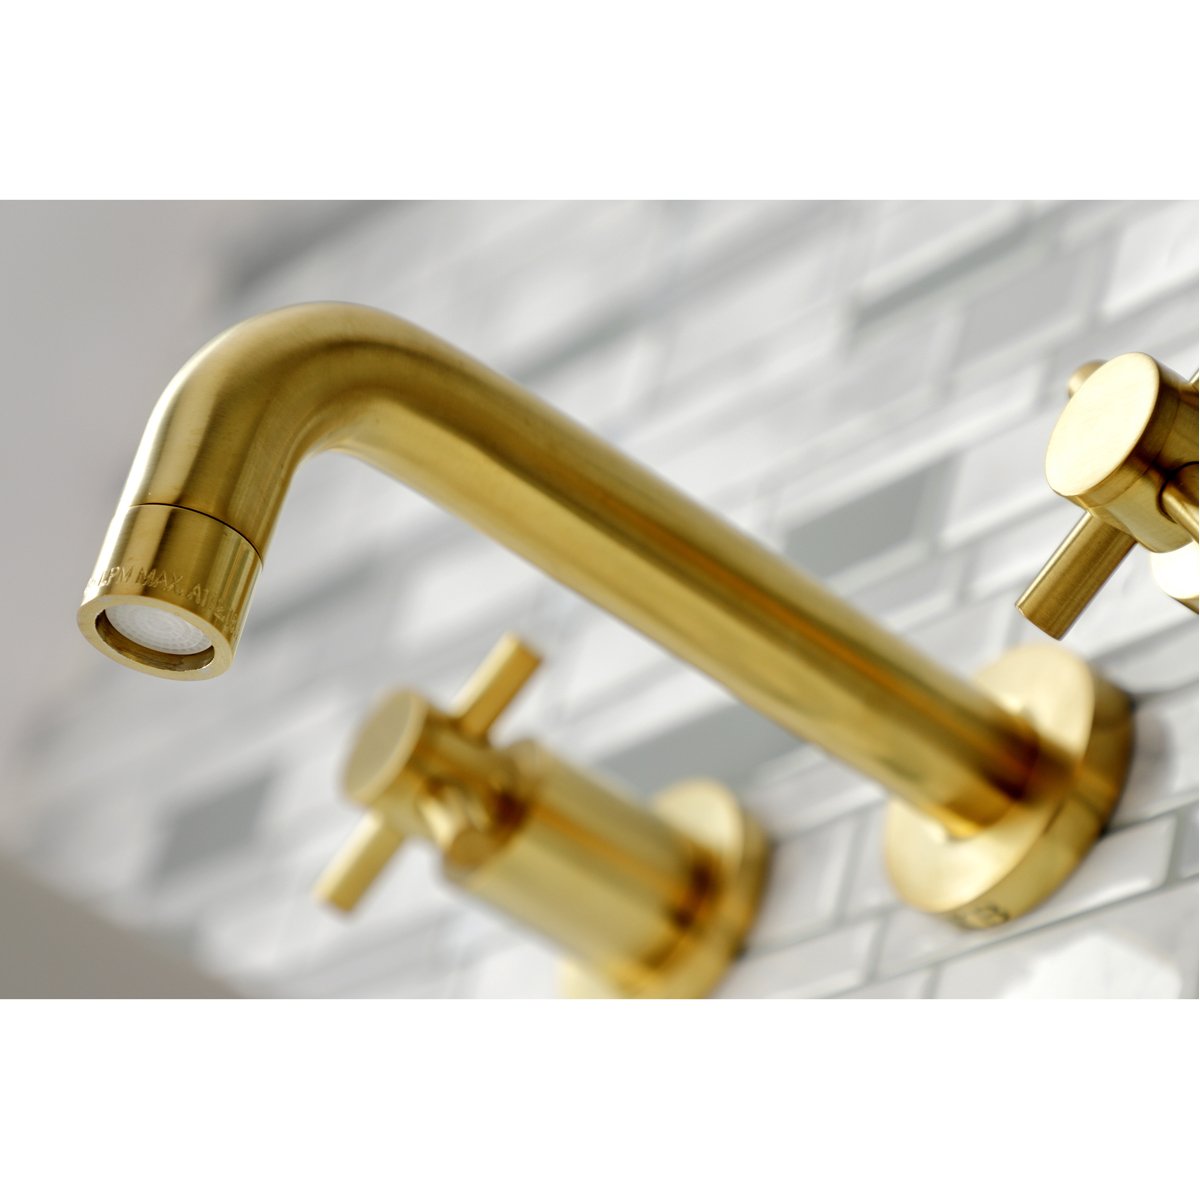 Kingston Brass Concord 2-Handle 3-Hole Wall Mount Bathroom Faucet